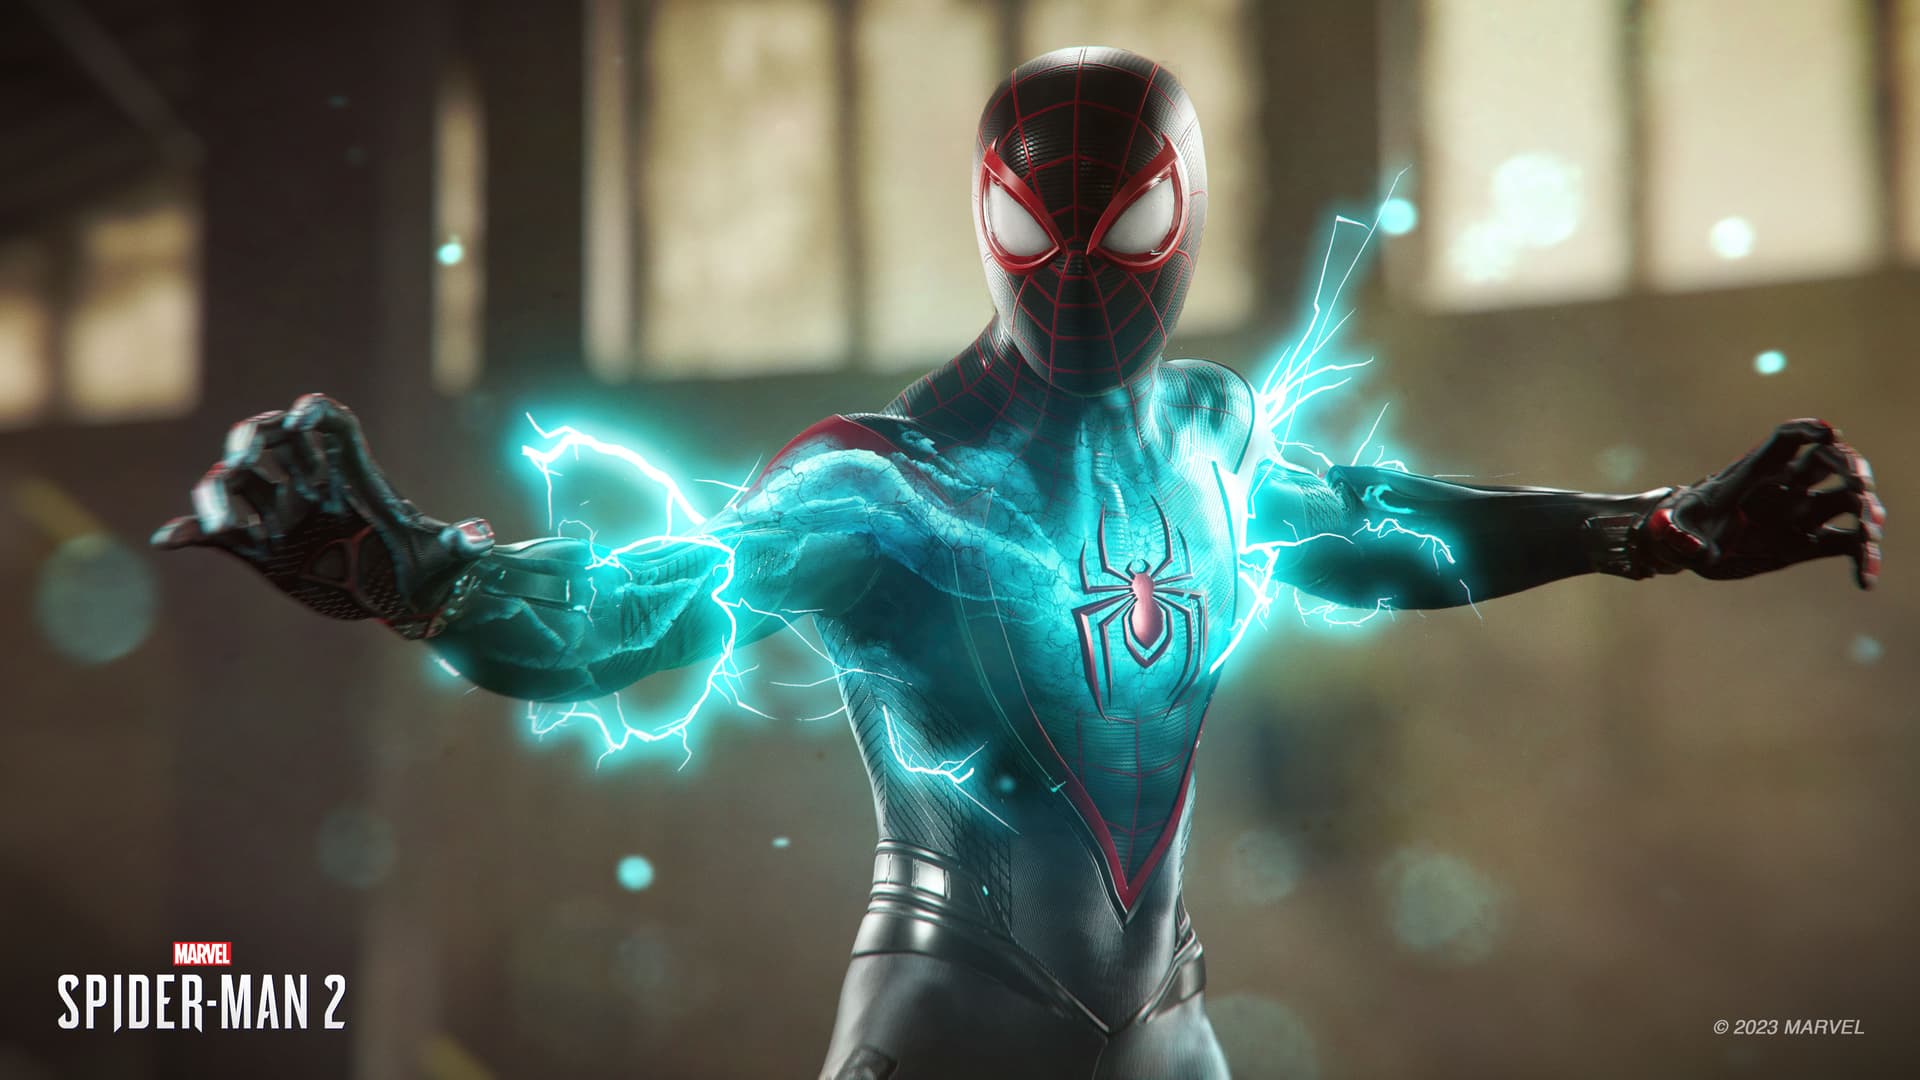 Miles Morales charges up with a venom blast in 'Marvel's Spider-Man 2'